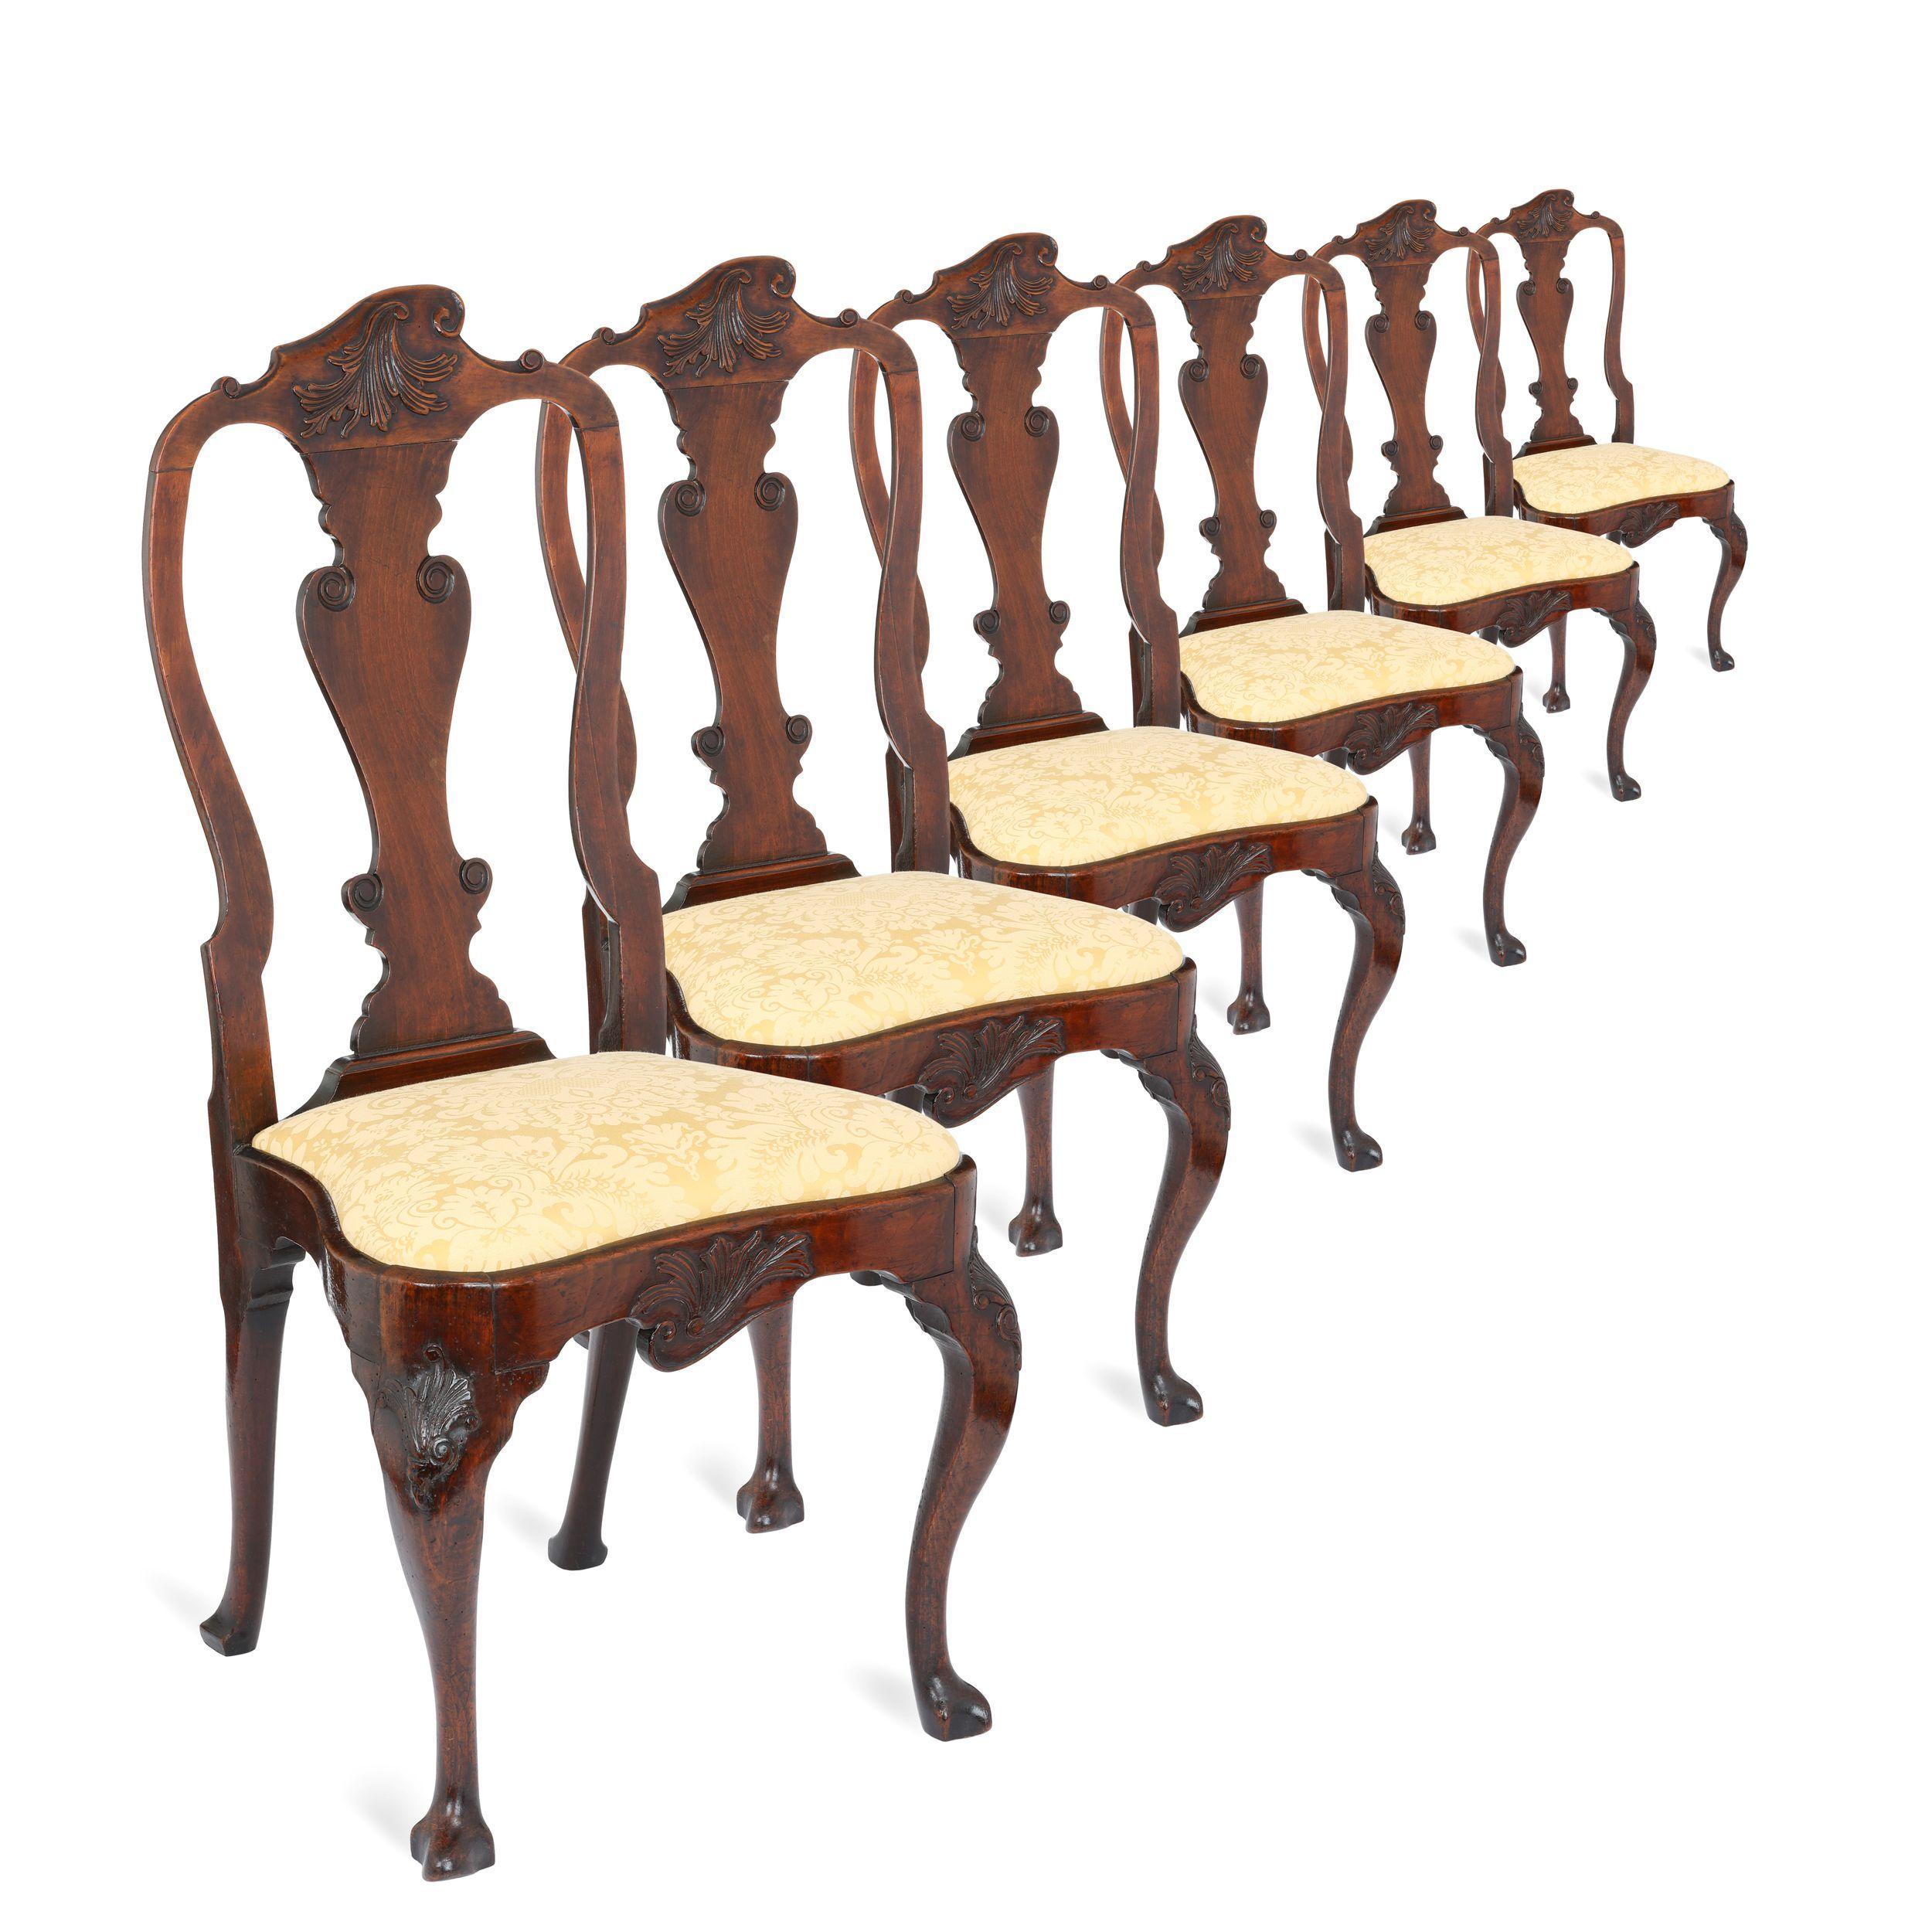 An exceedingly rare set of six George II solid walnut dining chairs on carved cabriole legs and of extremely rare design. Having asymmetrical carved scrolling motifs to the tops of the backs, mirrored on the central front seat rails.
The curved